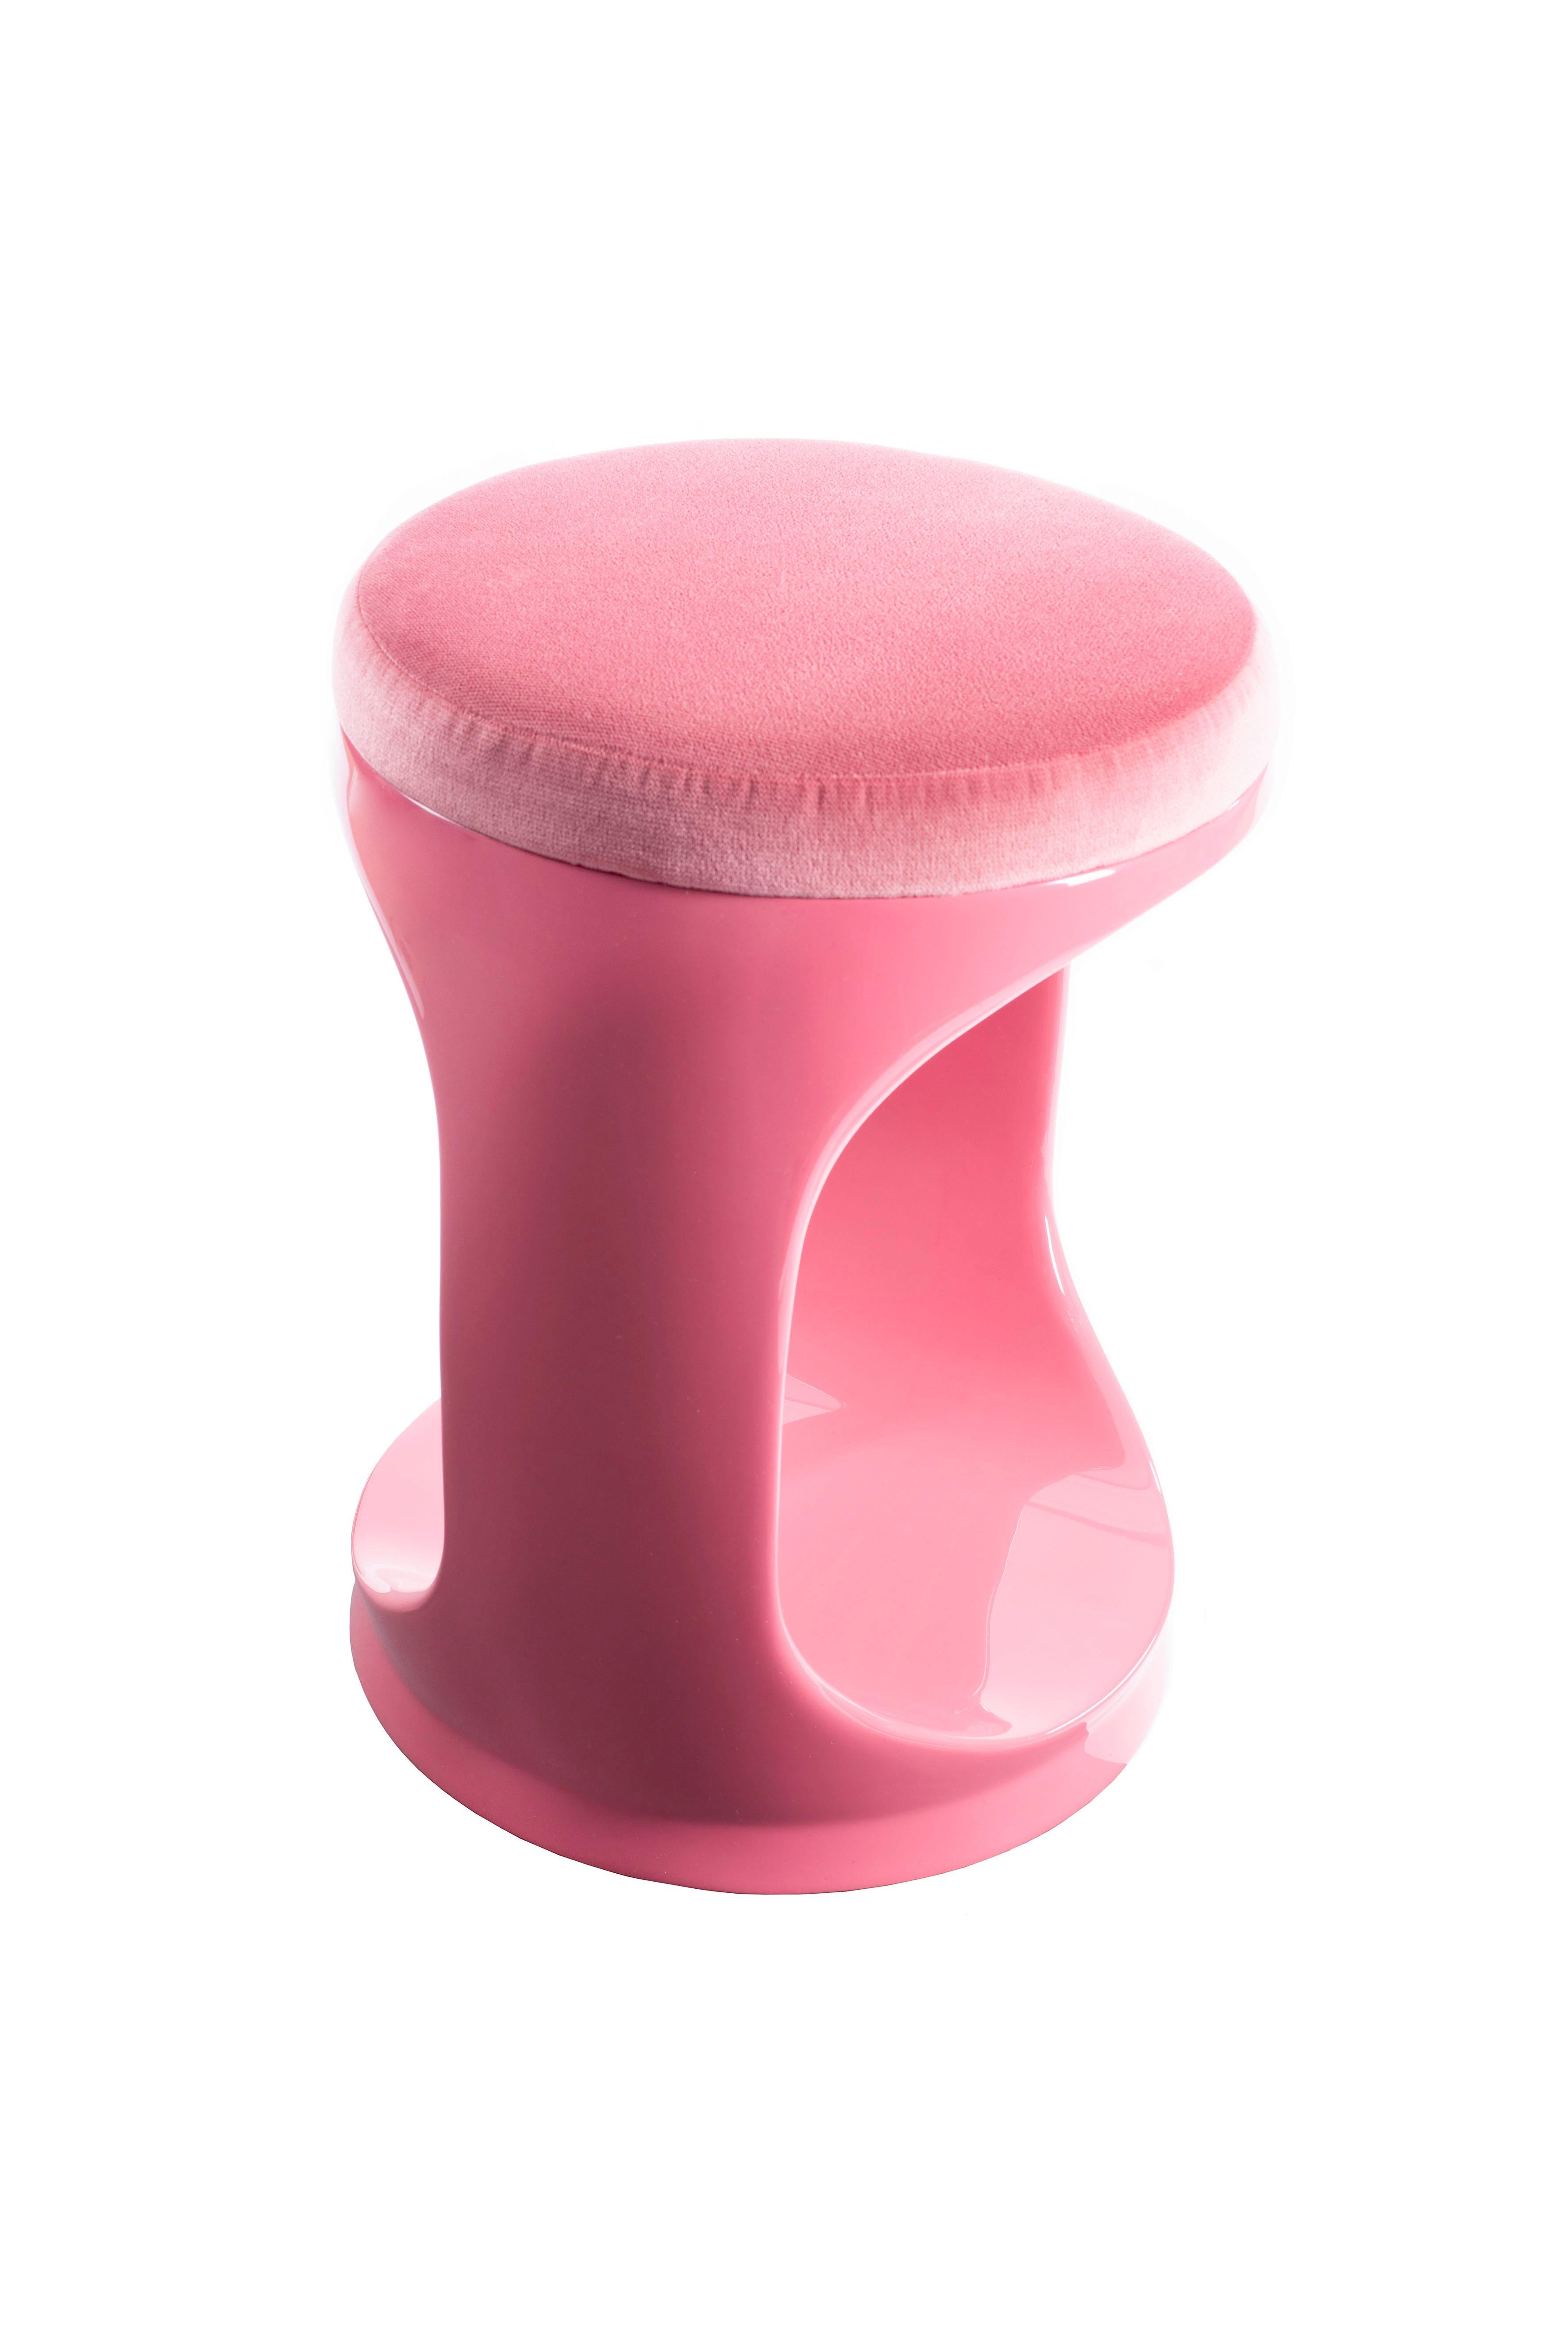 Molded Contemporary Stool by Cyril Rumpler Signet Ring, Pouf Seats Pink For Sale